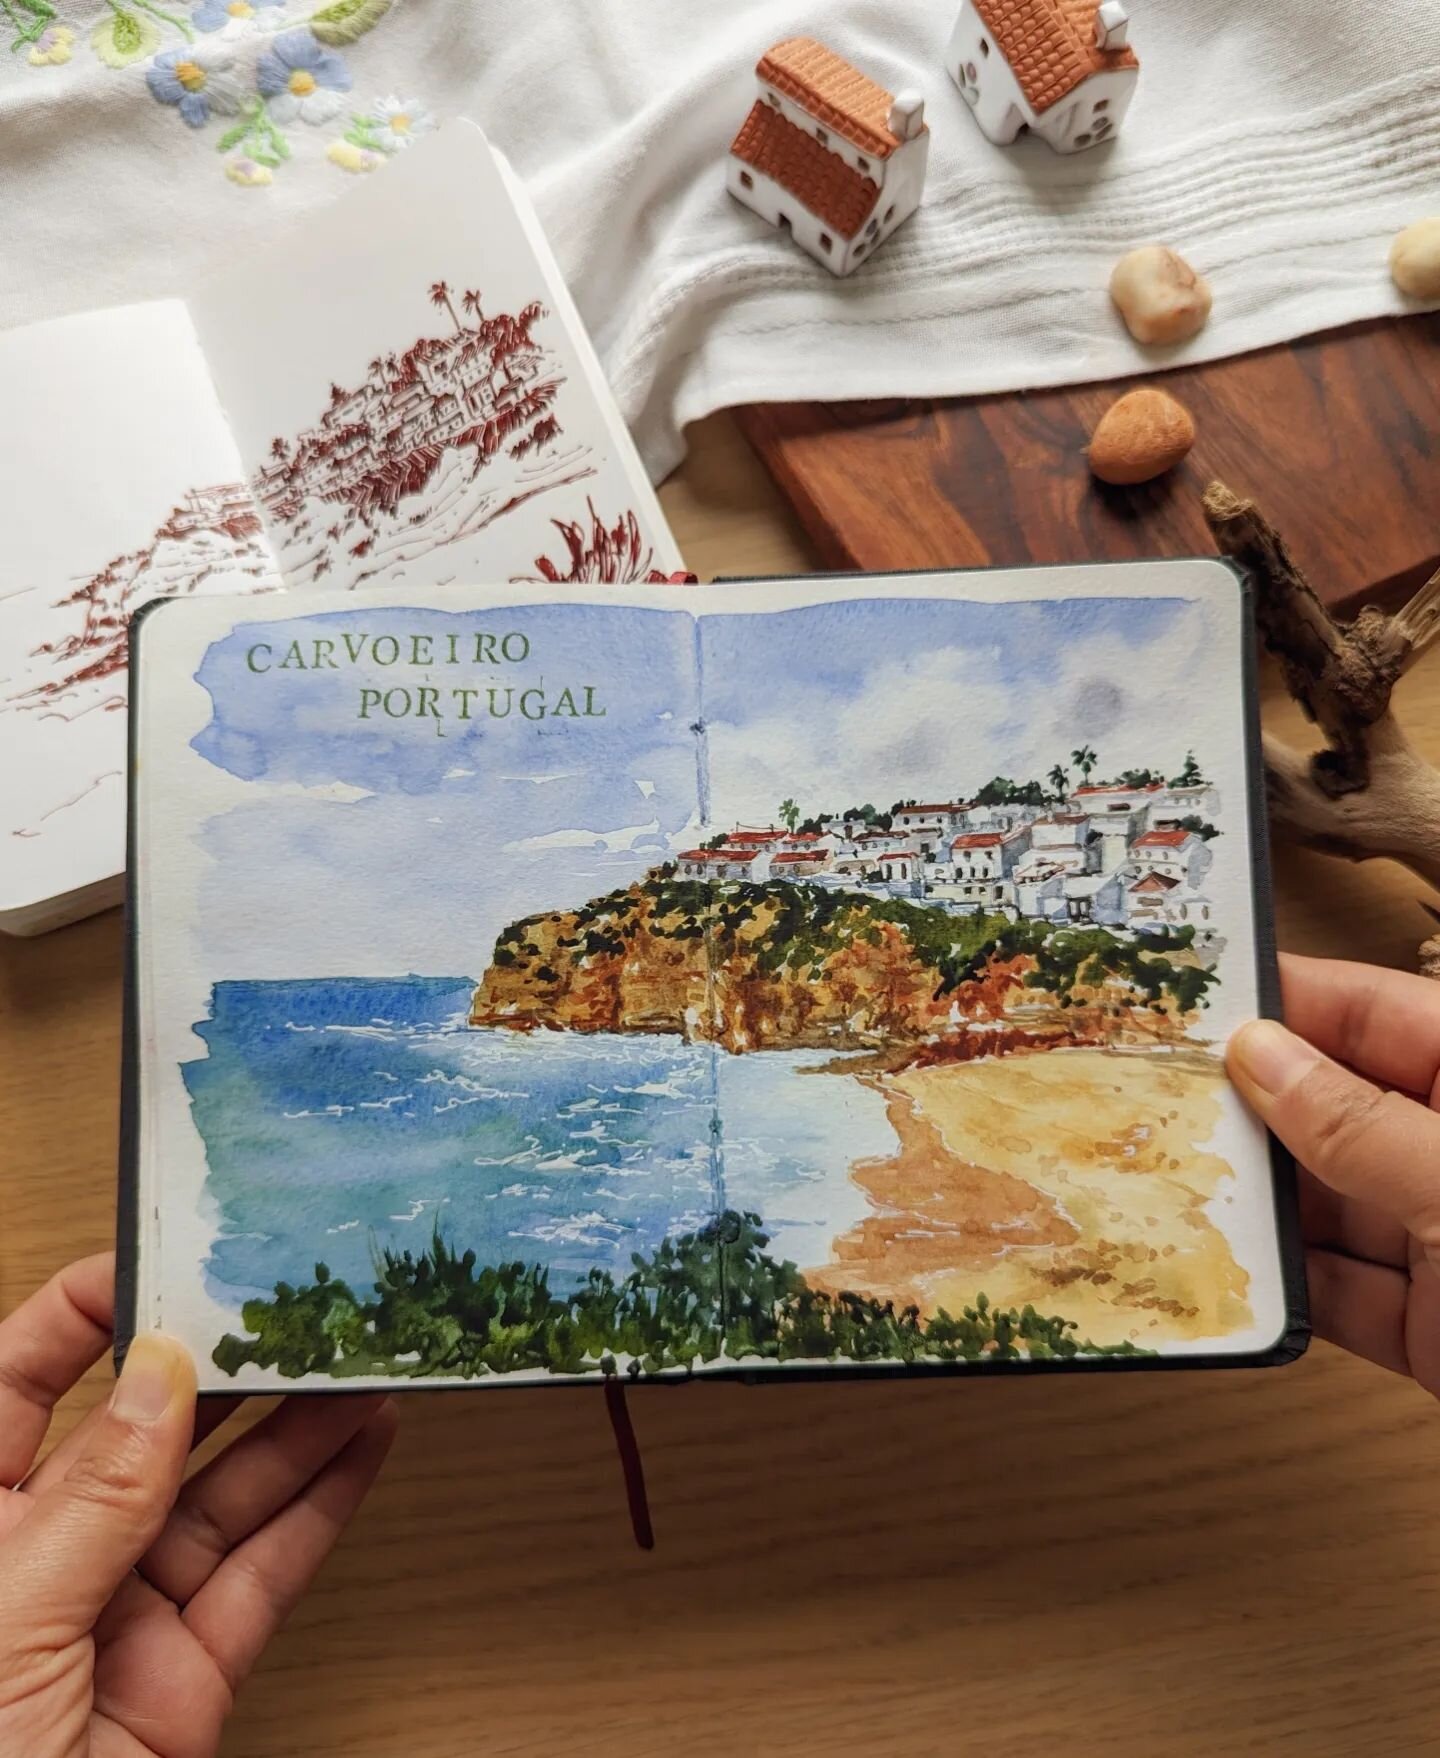 A few months ago we visited Carvoeiro, this beautiful white washed town with large rocky cliffs, clear blue waters, and incredible rock formations along the Algarve coastline.

When we were there I got to practice painting buildings, and understand t